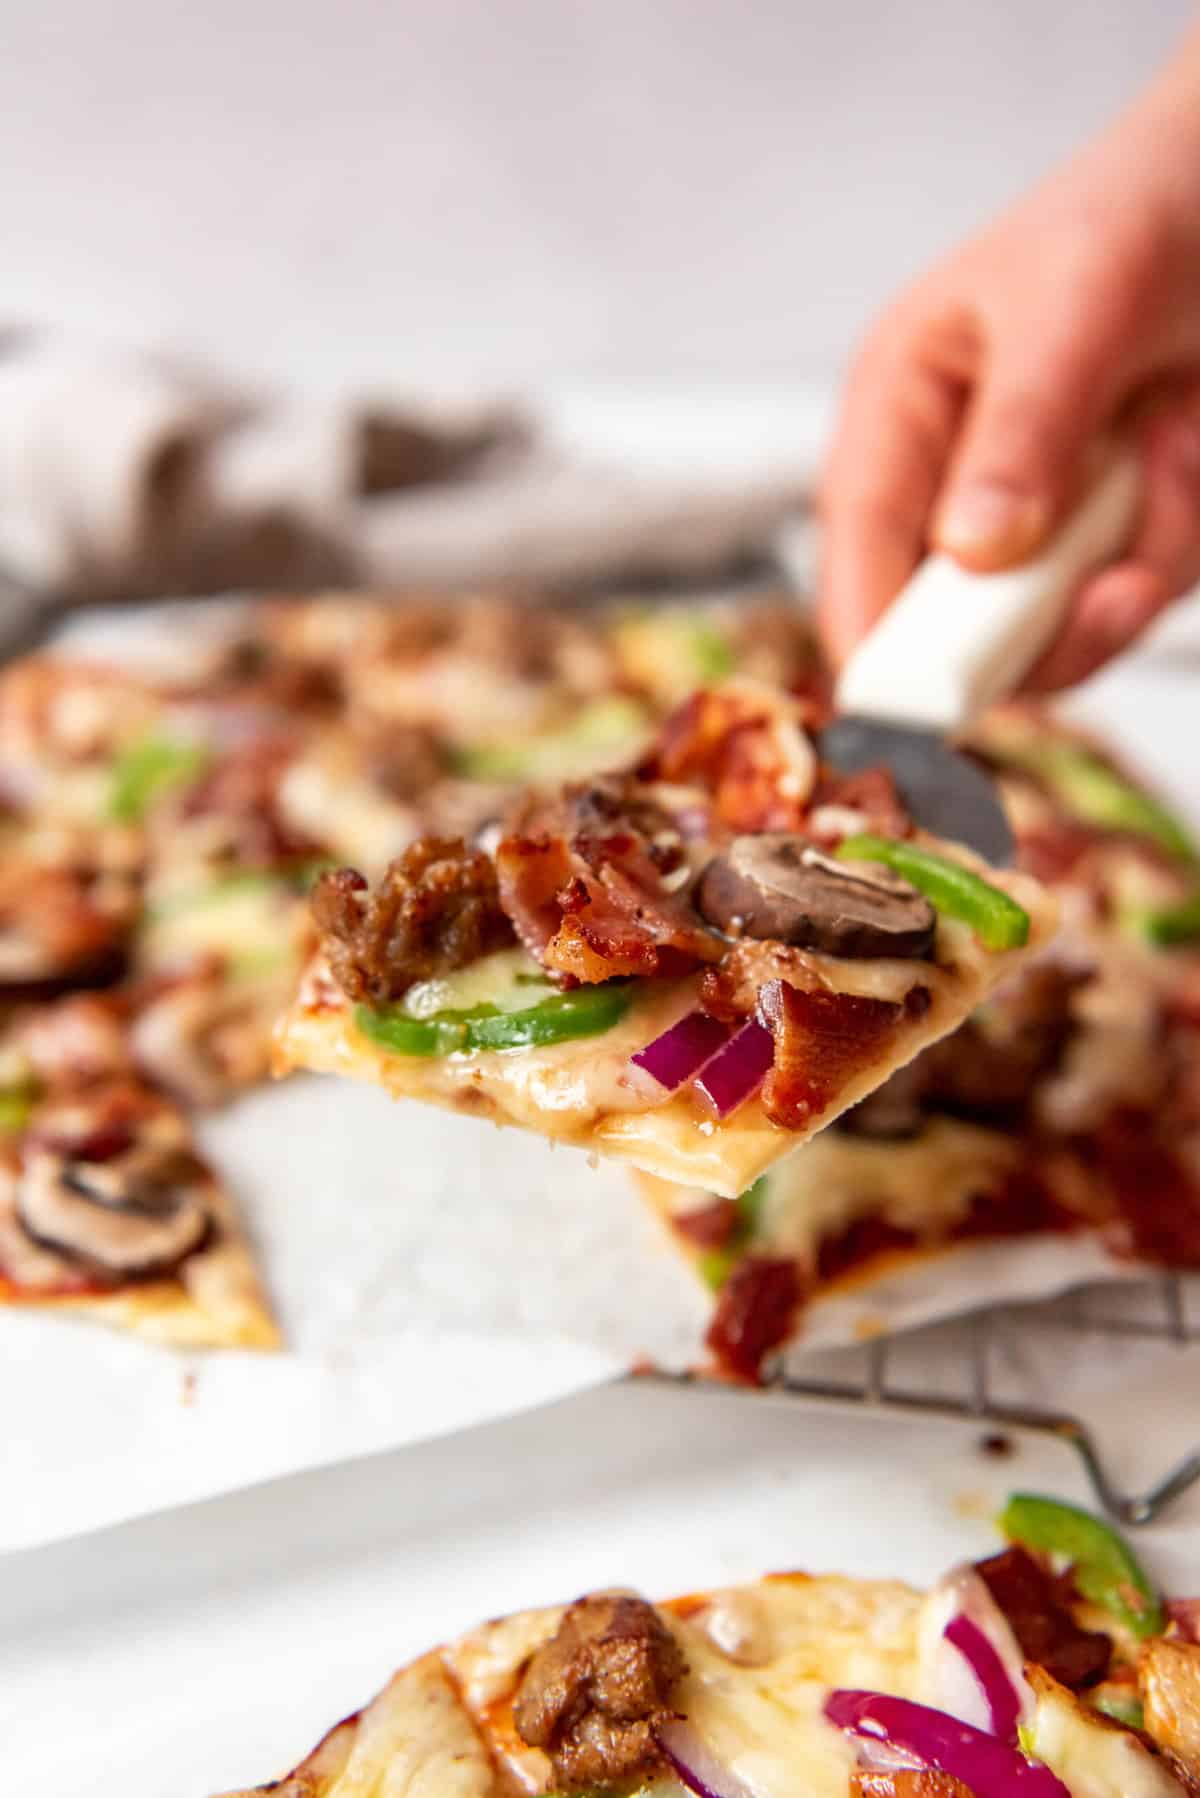 A hand lifting a slice of St. Louis-style pizza on a spatula.